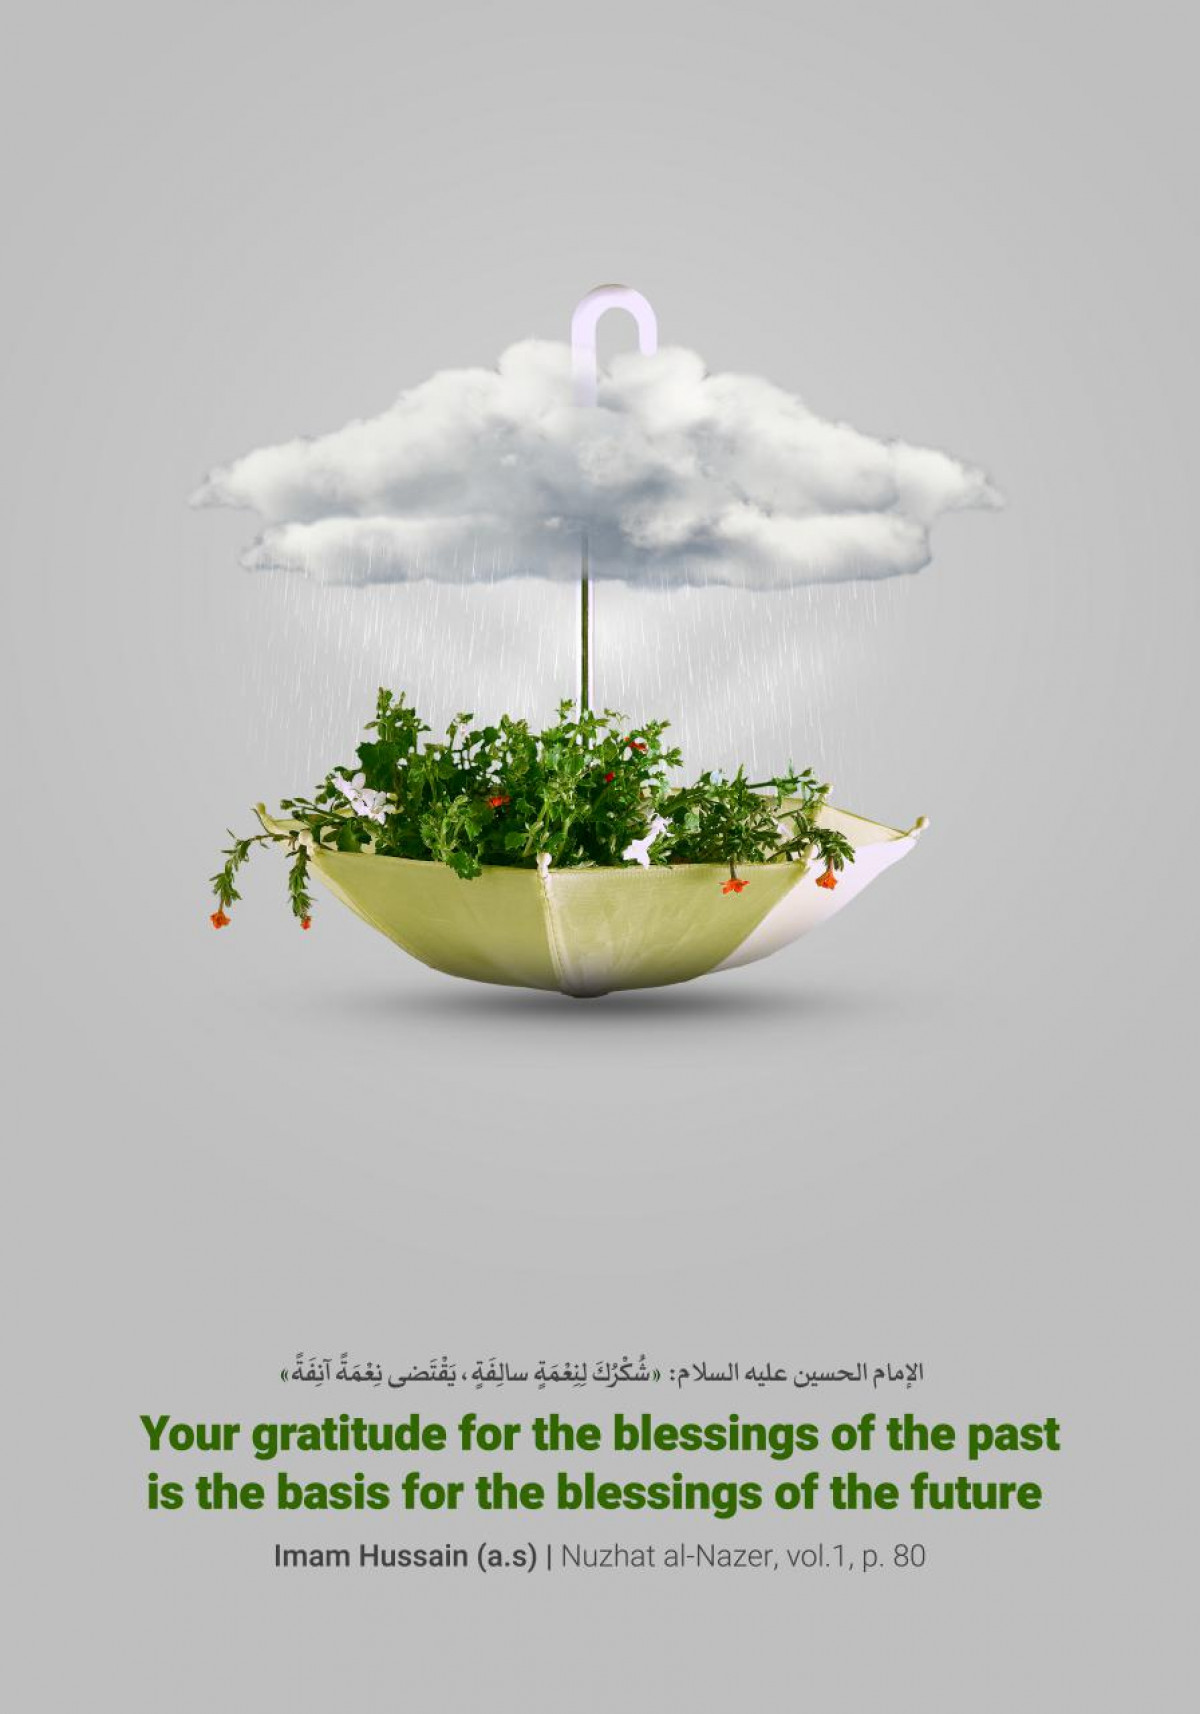 Your gratitude for the blessings of the past is the basis for the blessings of the future